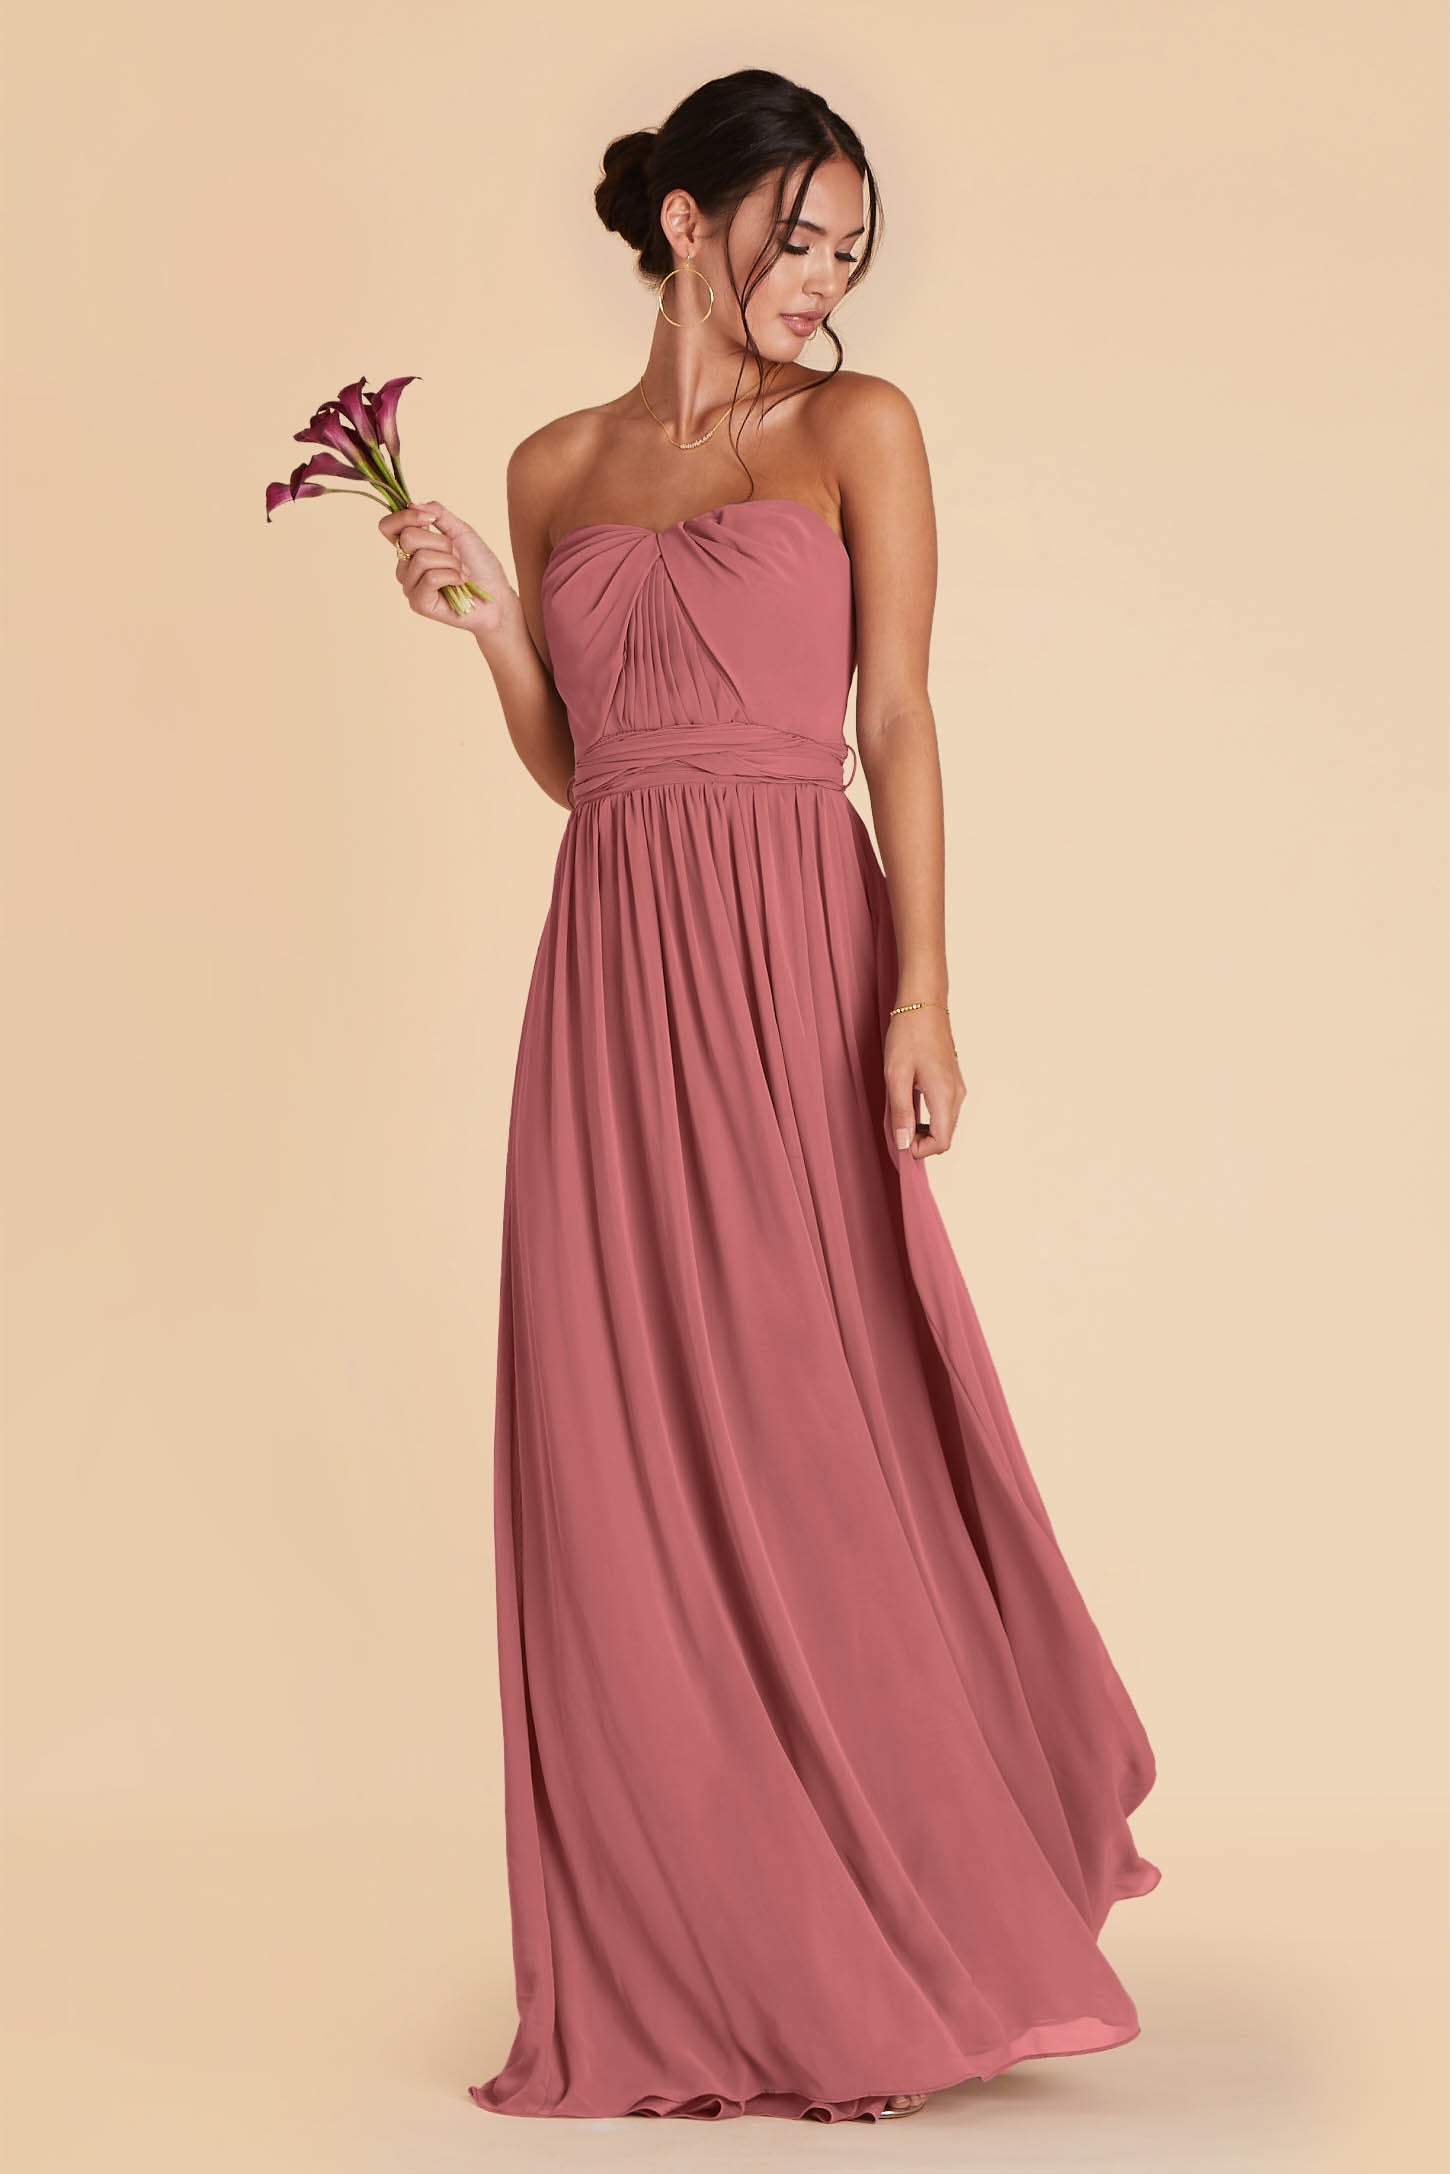 Grace convertible bridesmaid dress in Mulberry Chiffon by Birdy Grey, front view